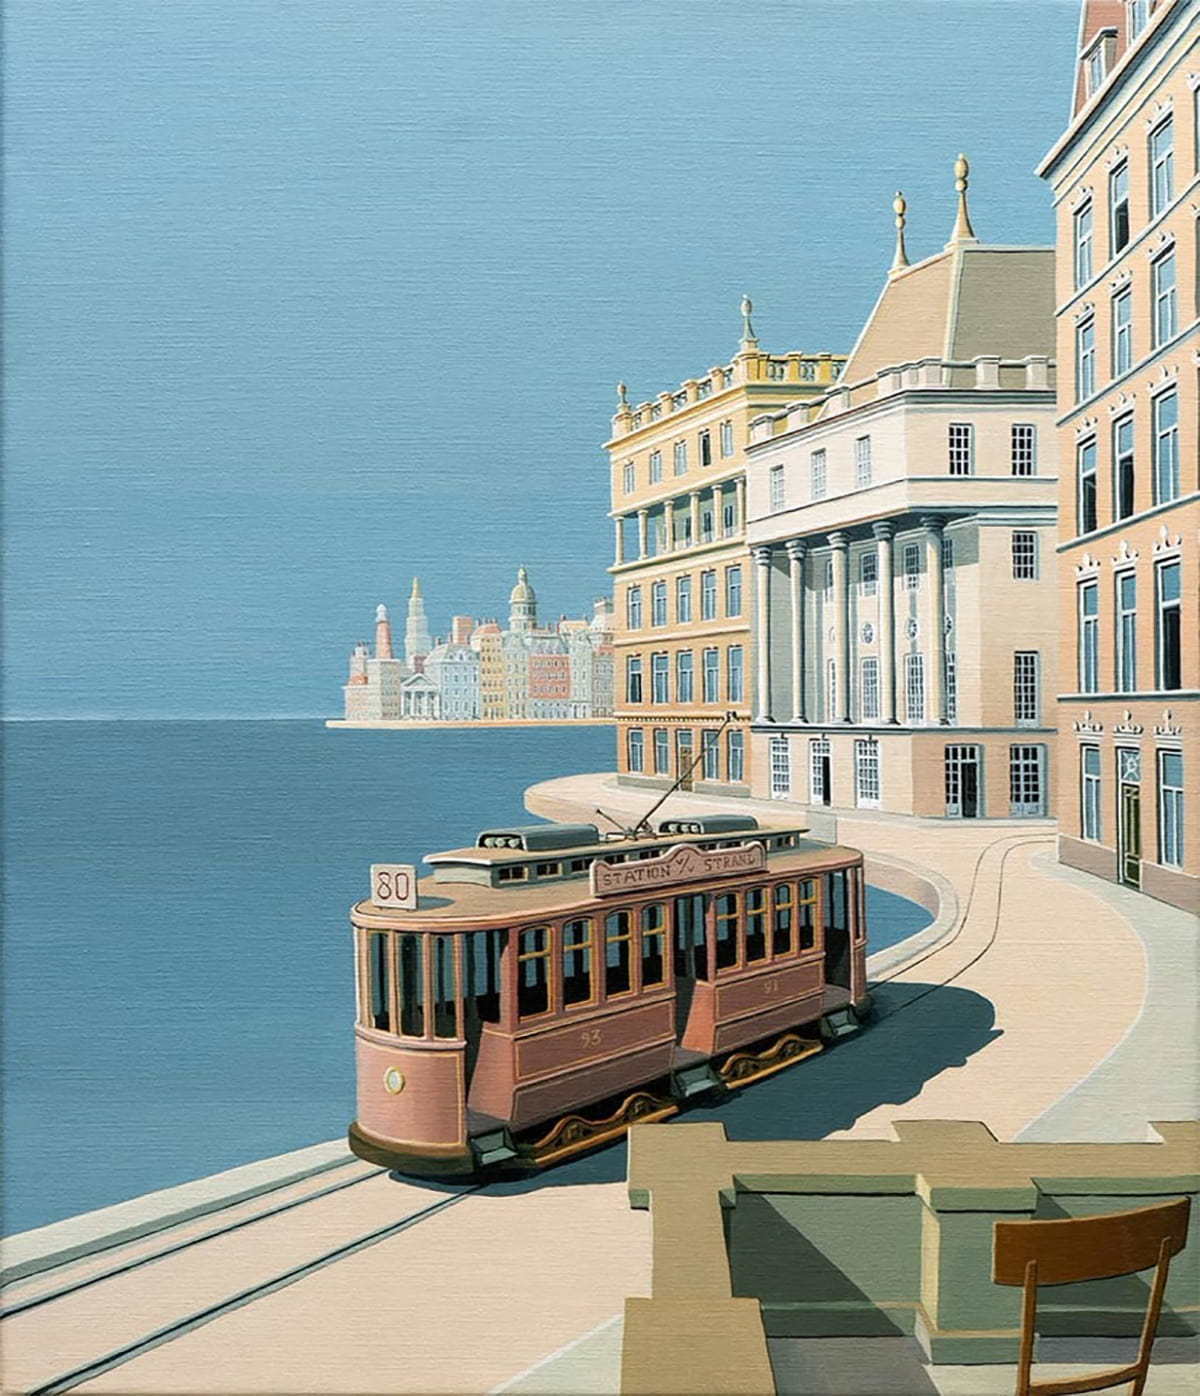 Tram by the Sea